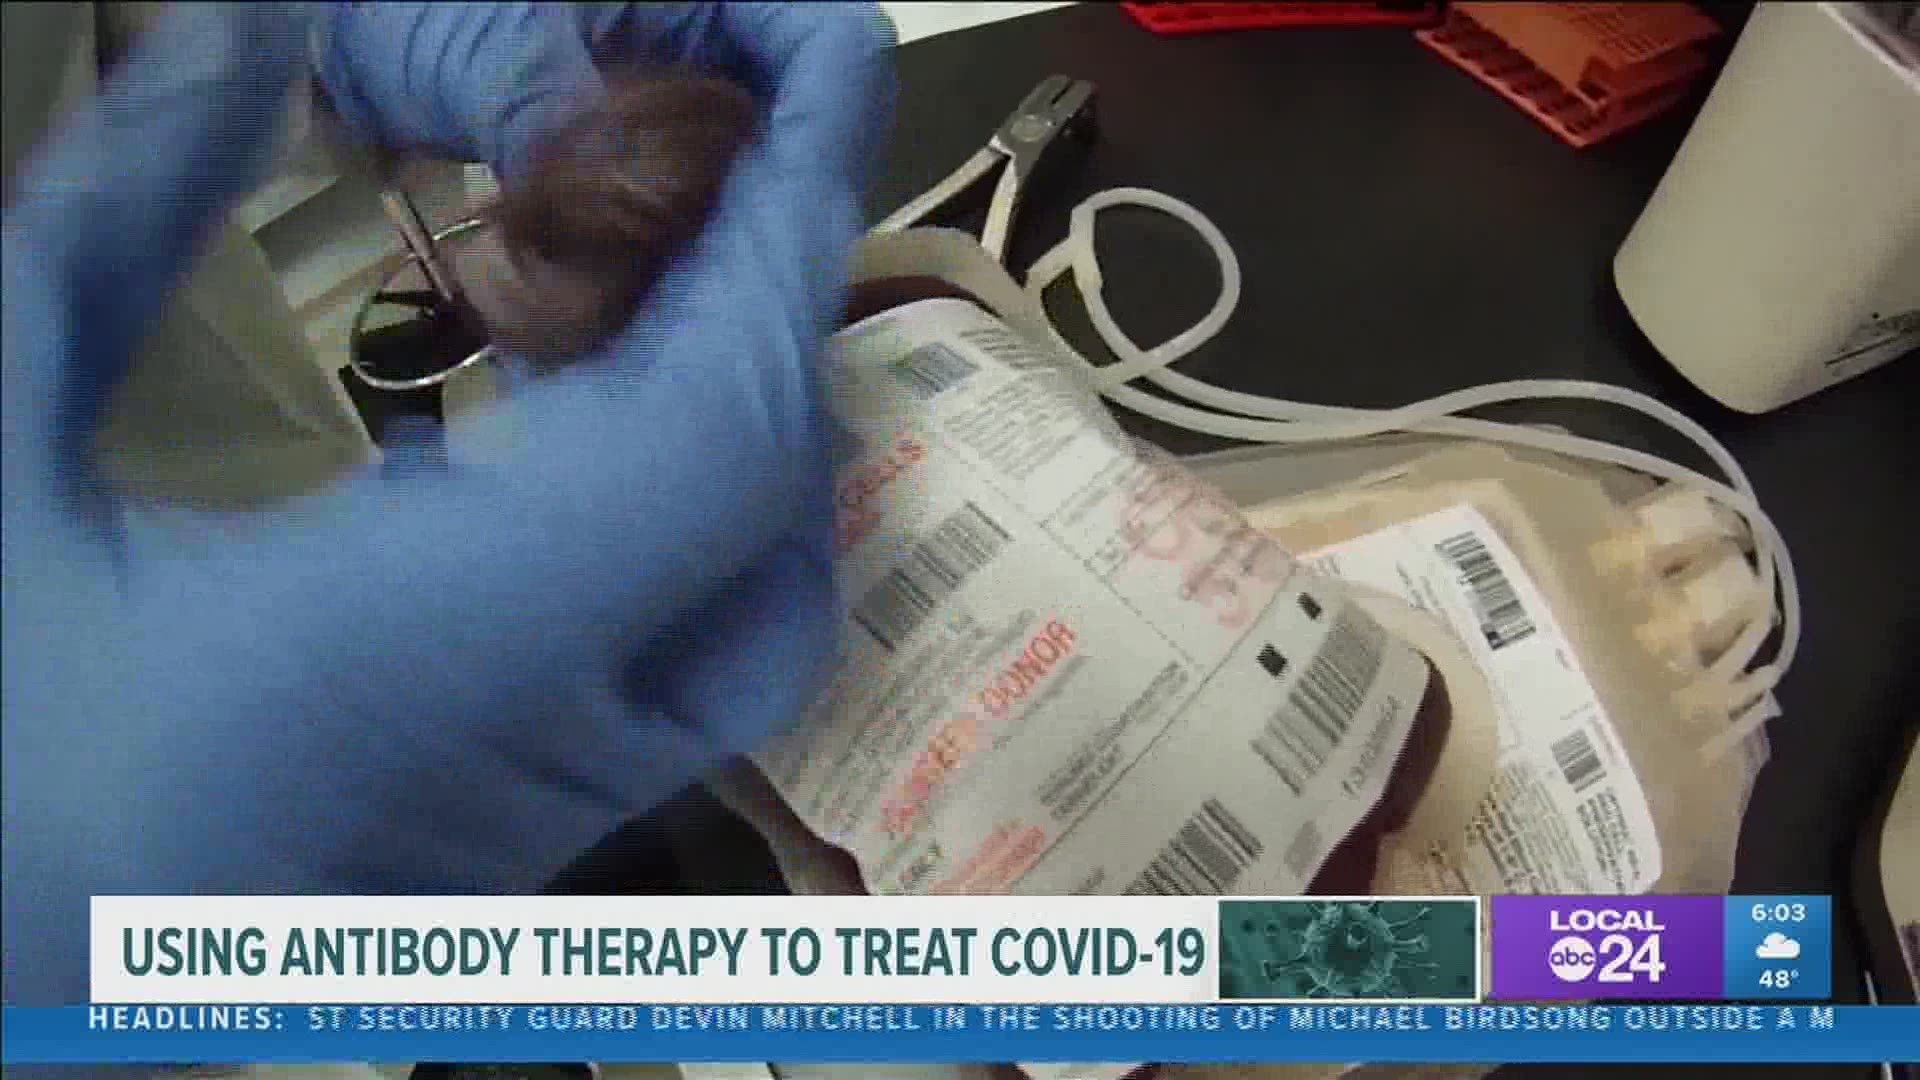 “It’s only been used after people have already had the infection, but early on before they get really sick,” said infectious disease expert Dr. Steve Threlkeld.